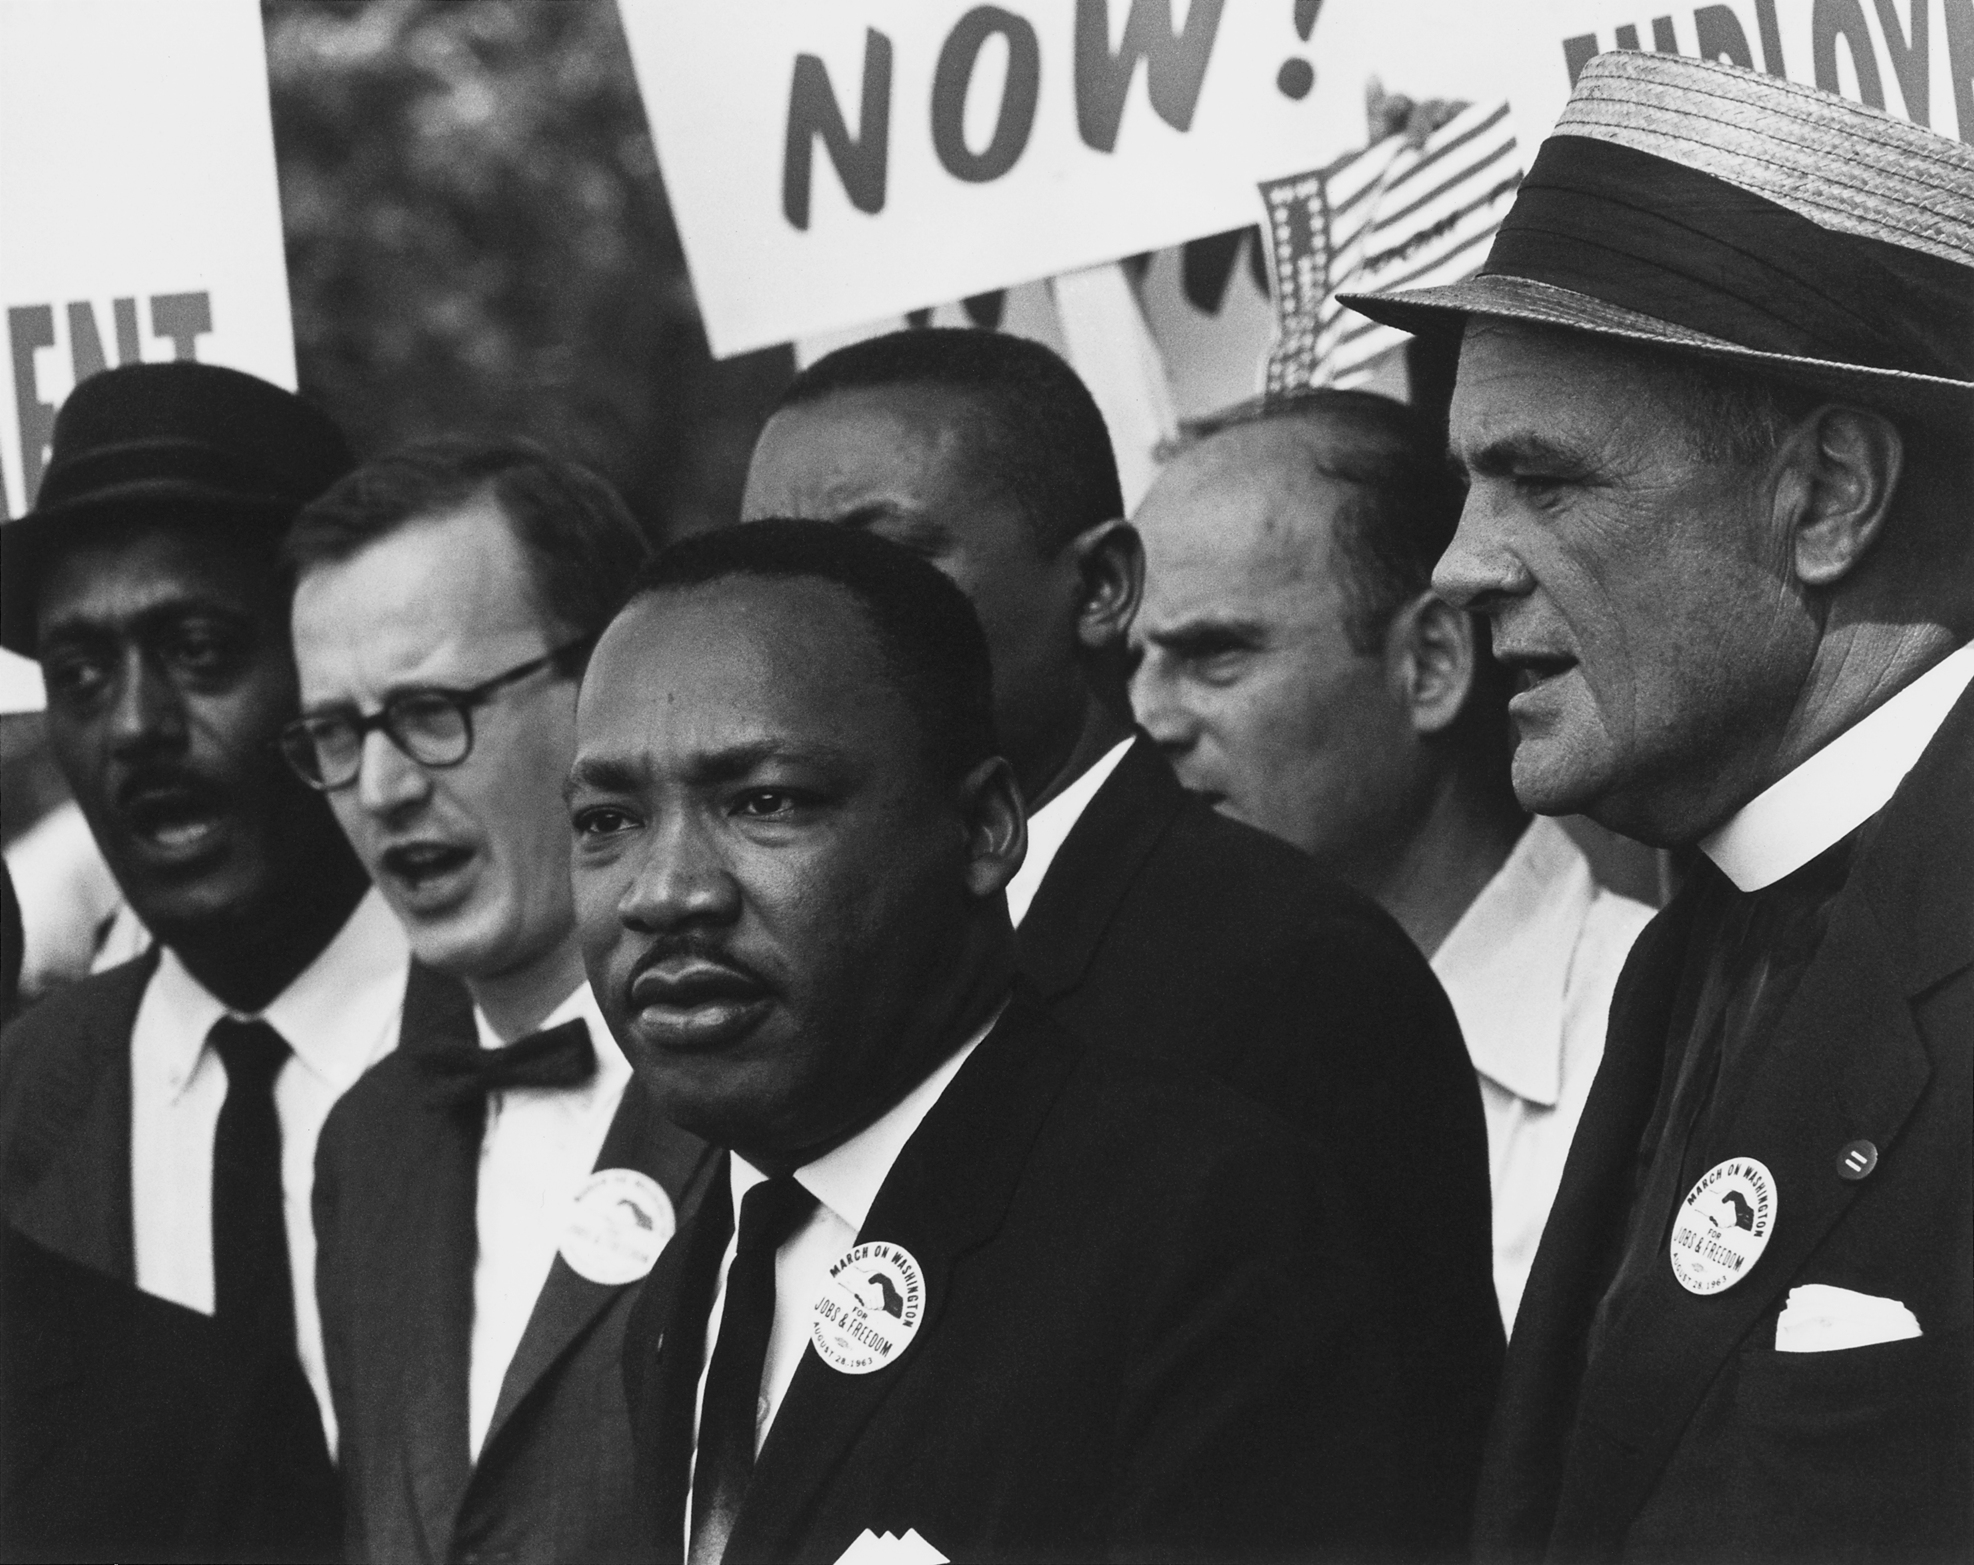 Il y a 50 ans, ils assassinent Martin Luther King